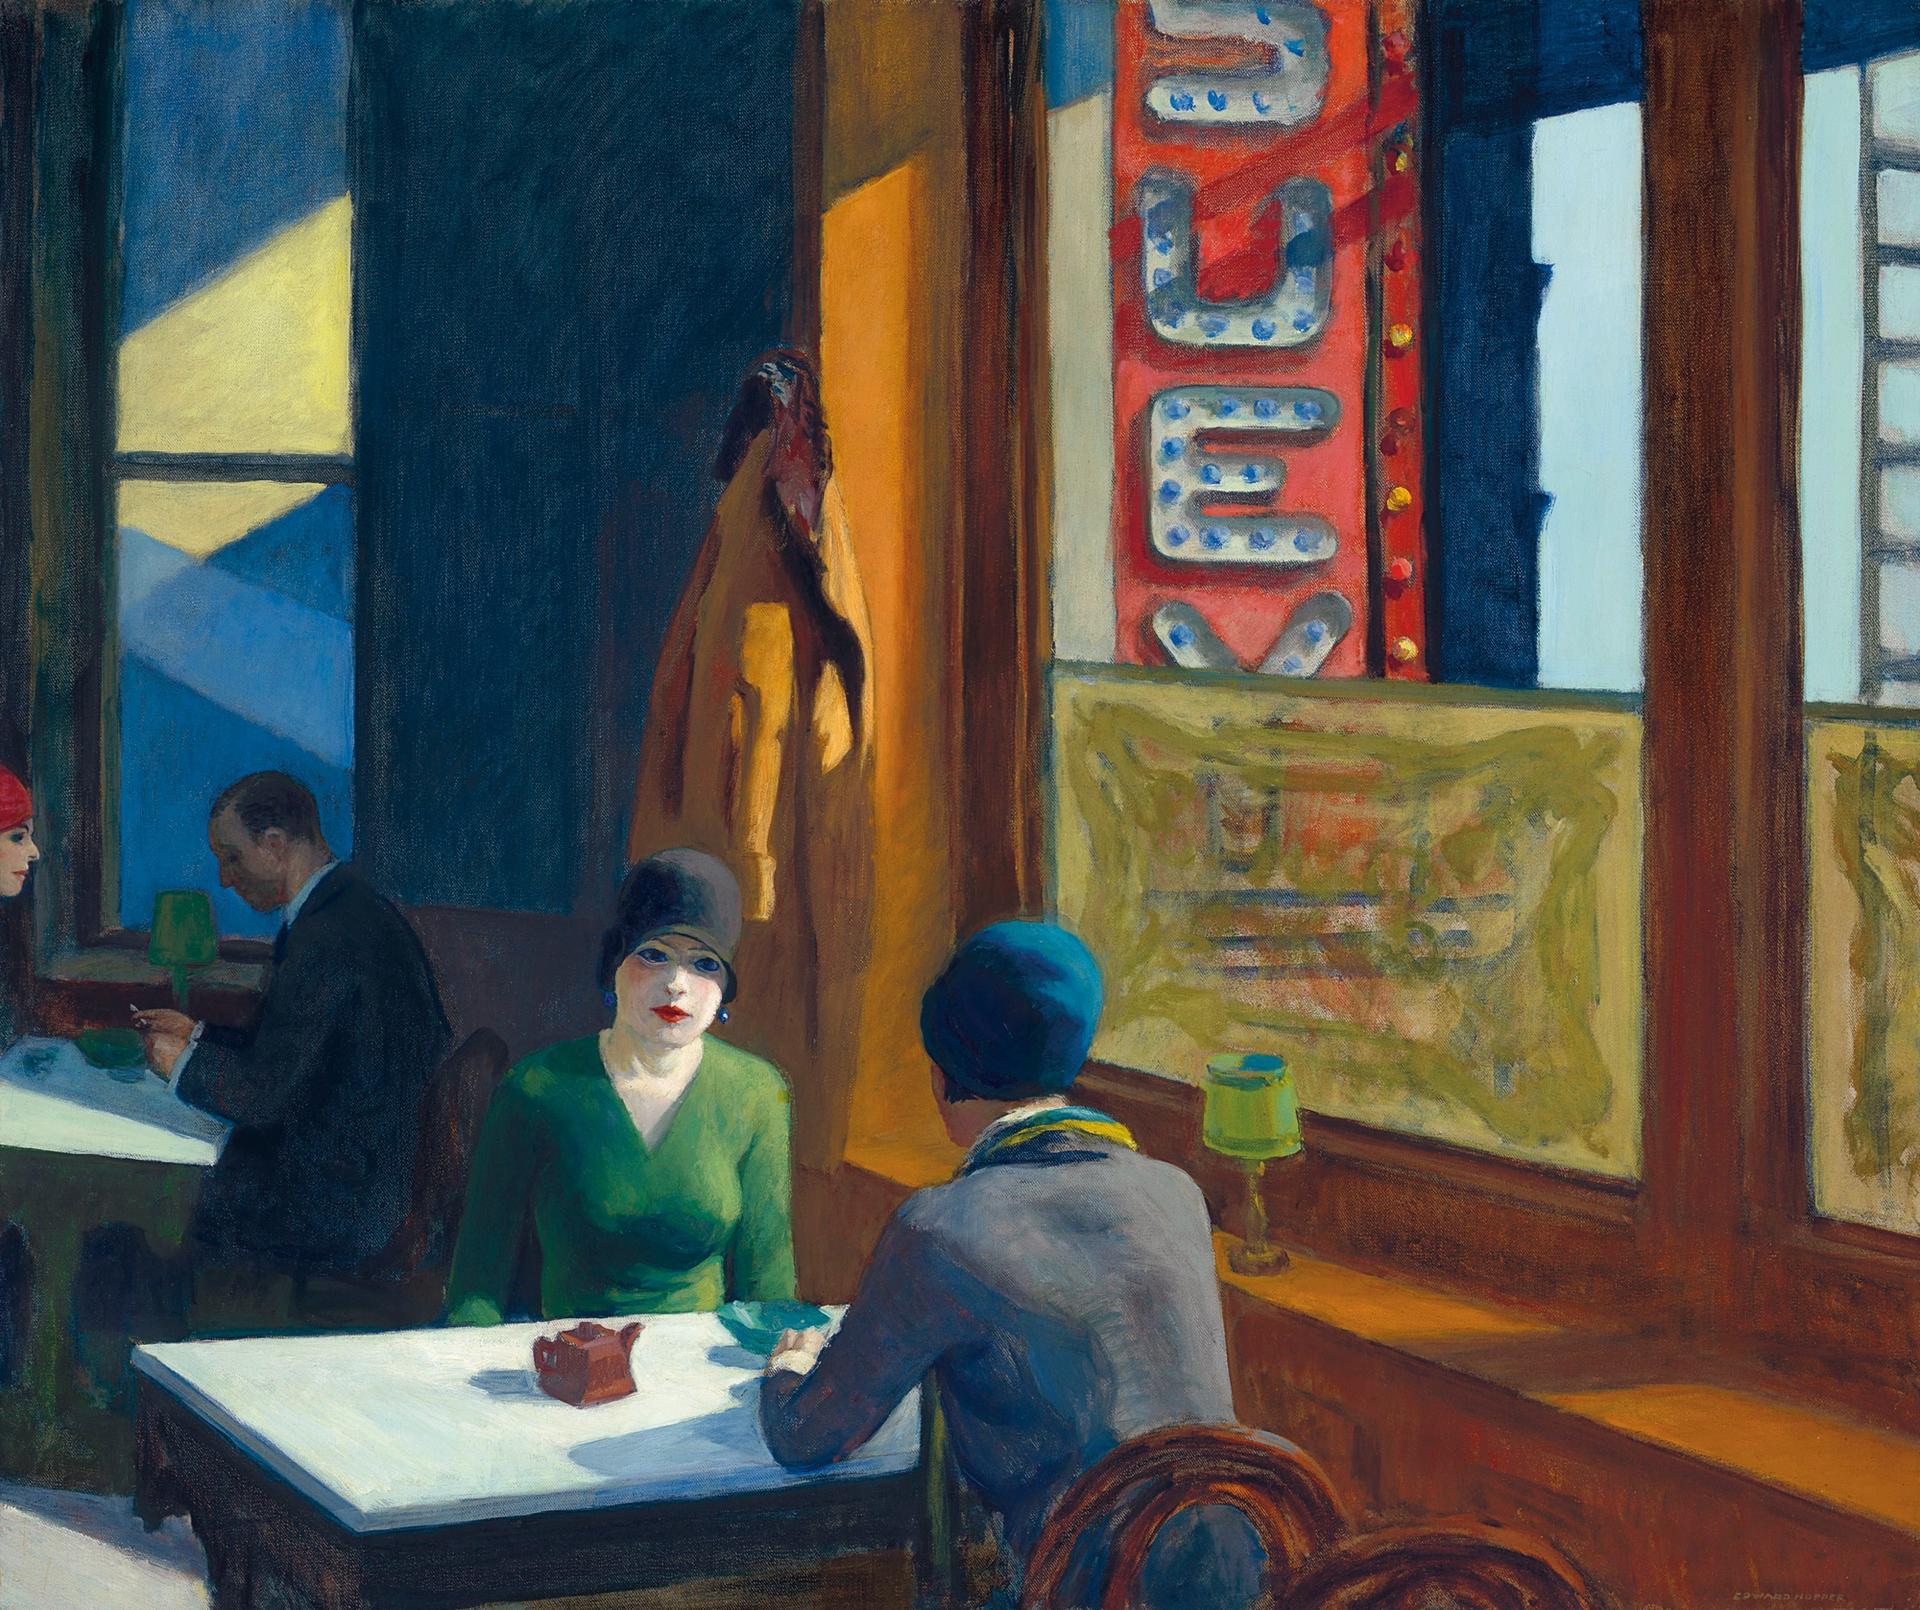 Edward Hopper's Chop Suey sold for $85m ($91.8m with fees) Courtesy of Christie's